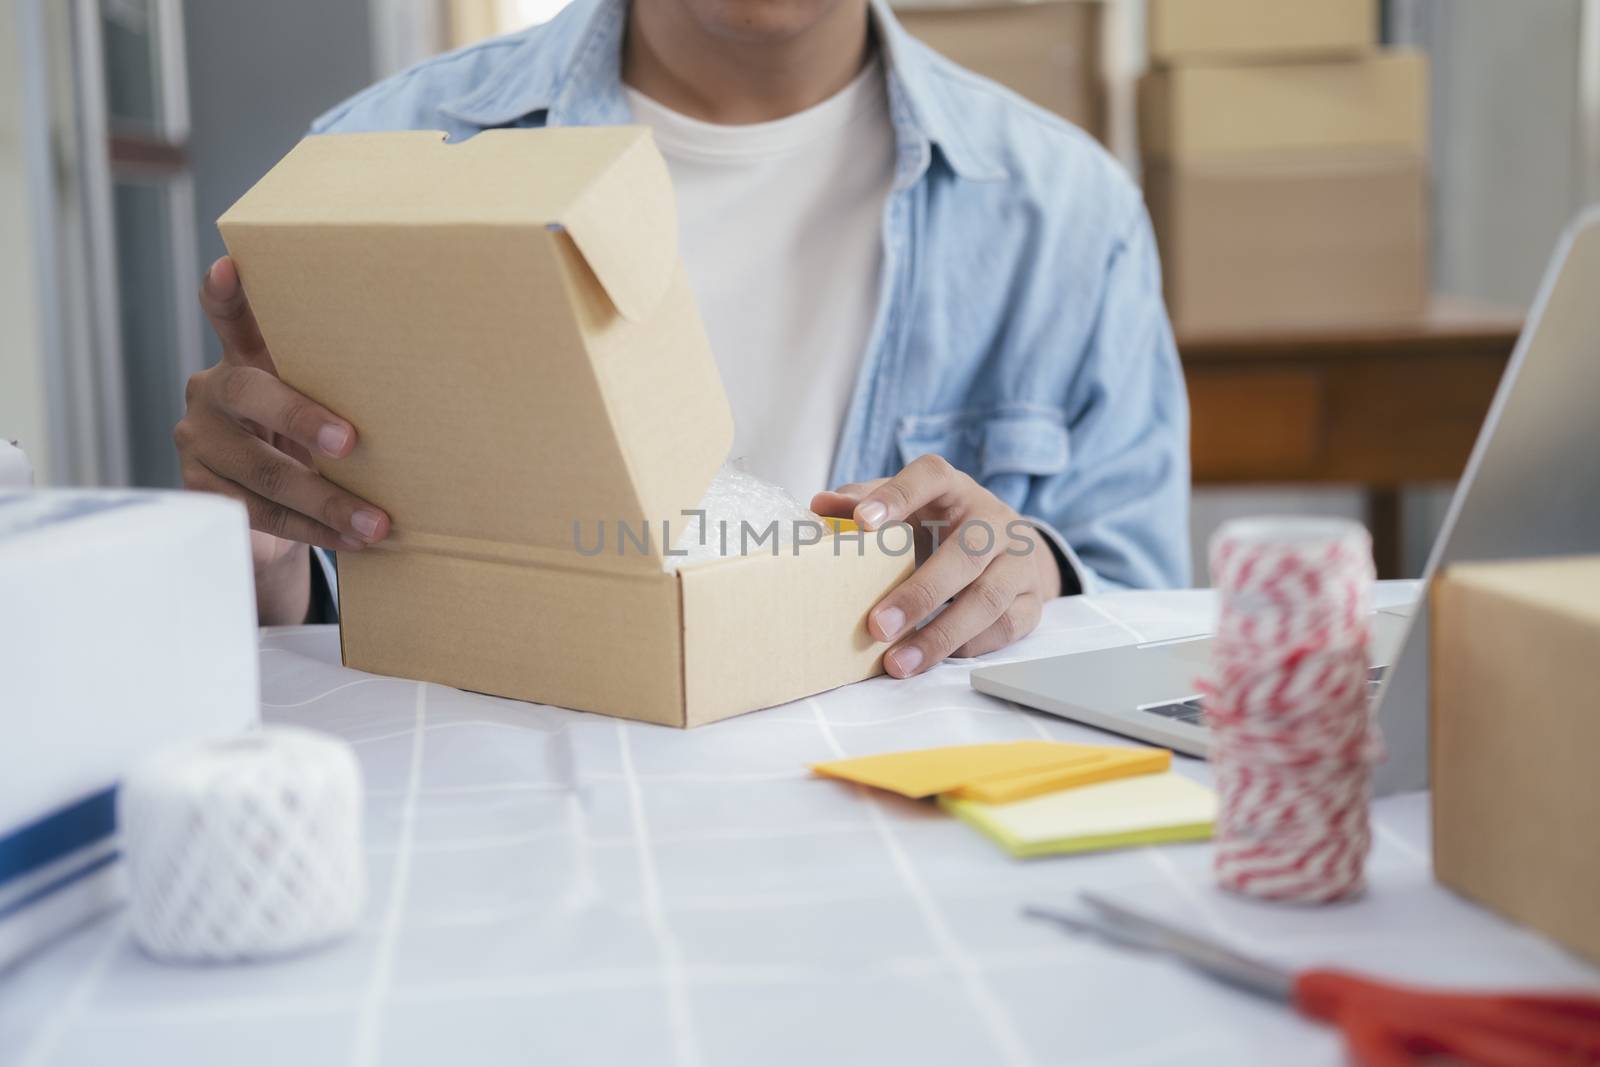 Online small business owner. Young startup entrepreneur online small business owner working at home, packaging and delivery situation. 